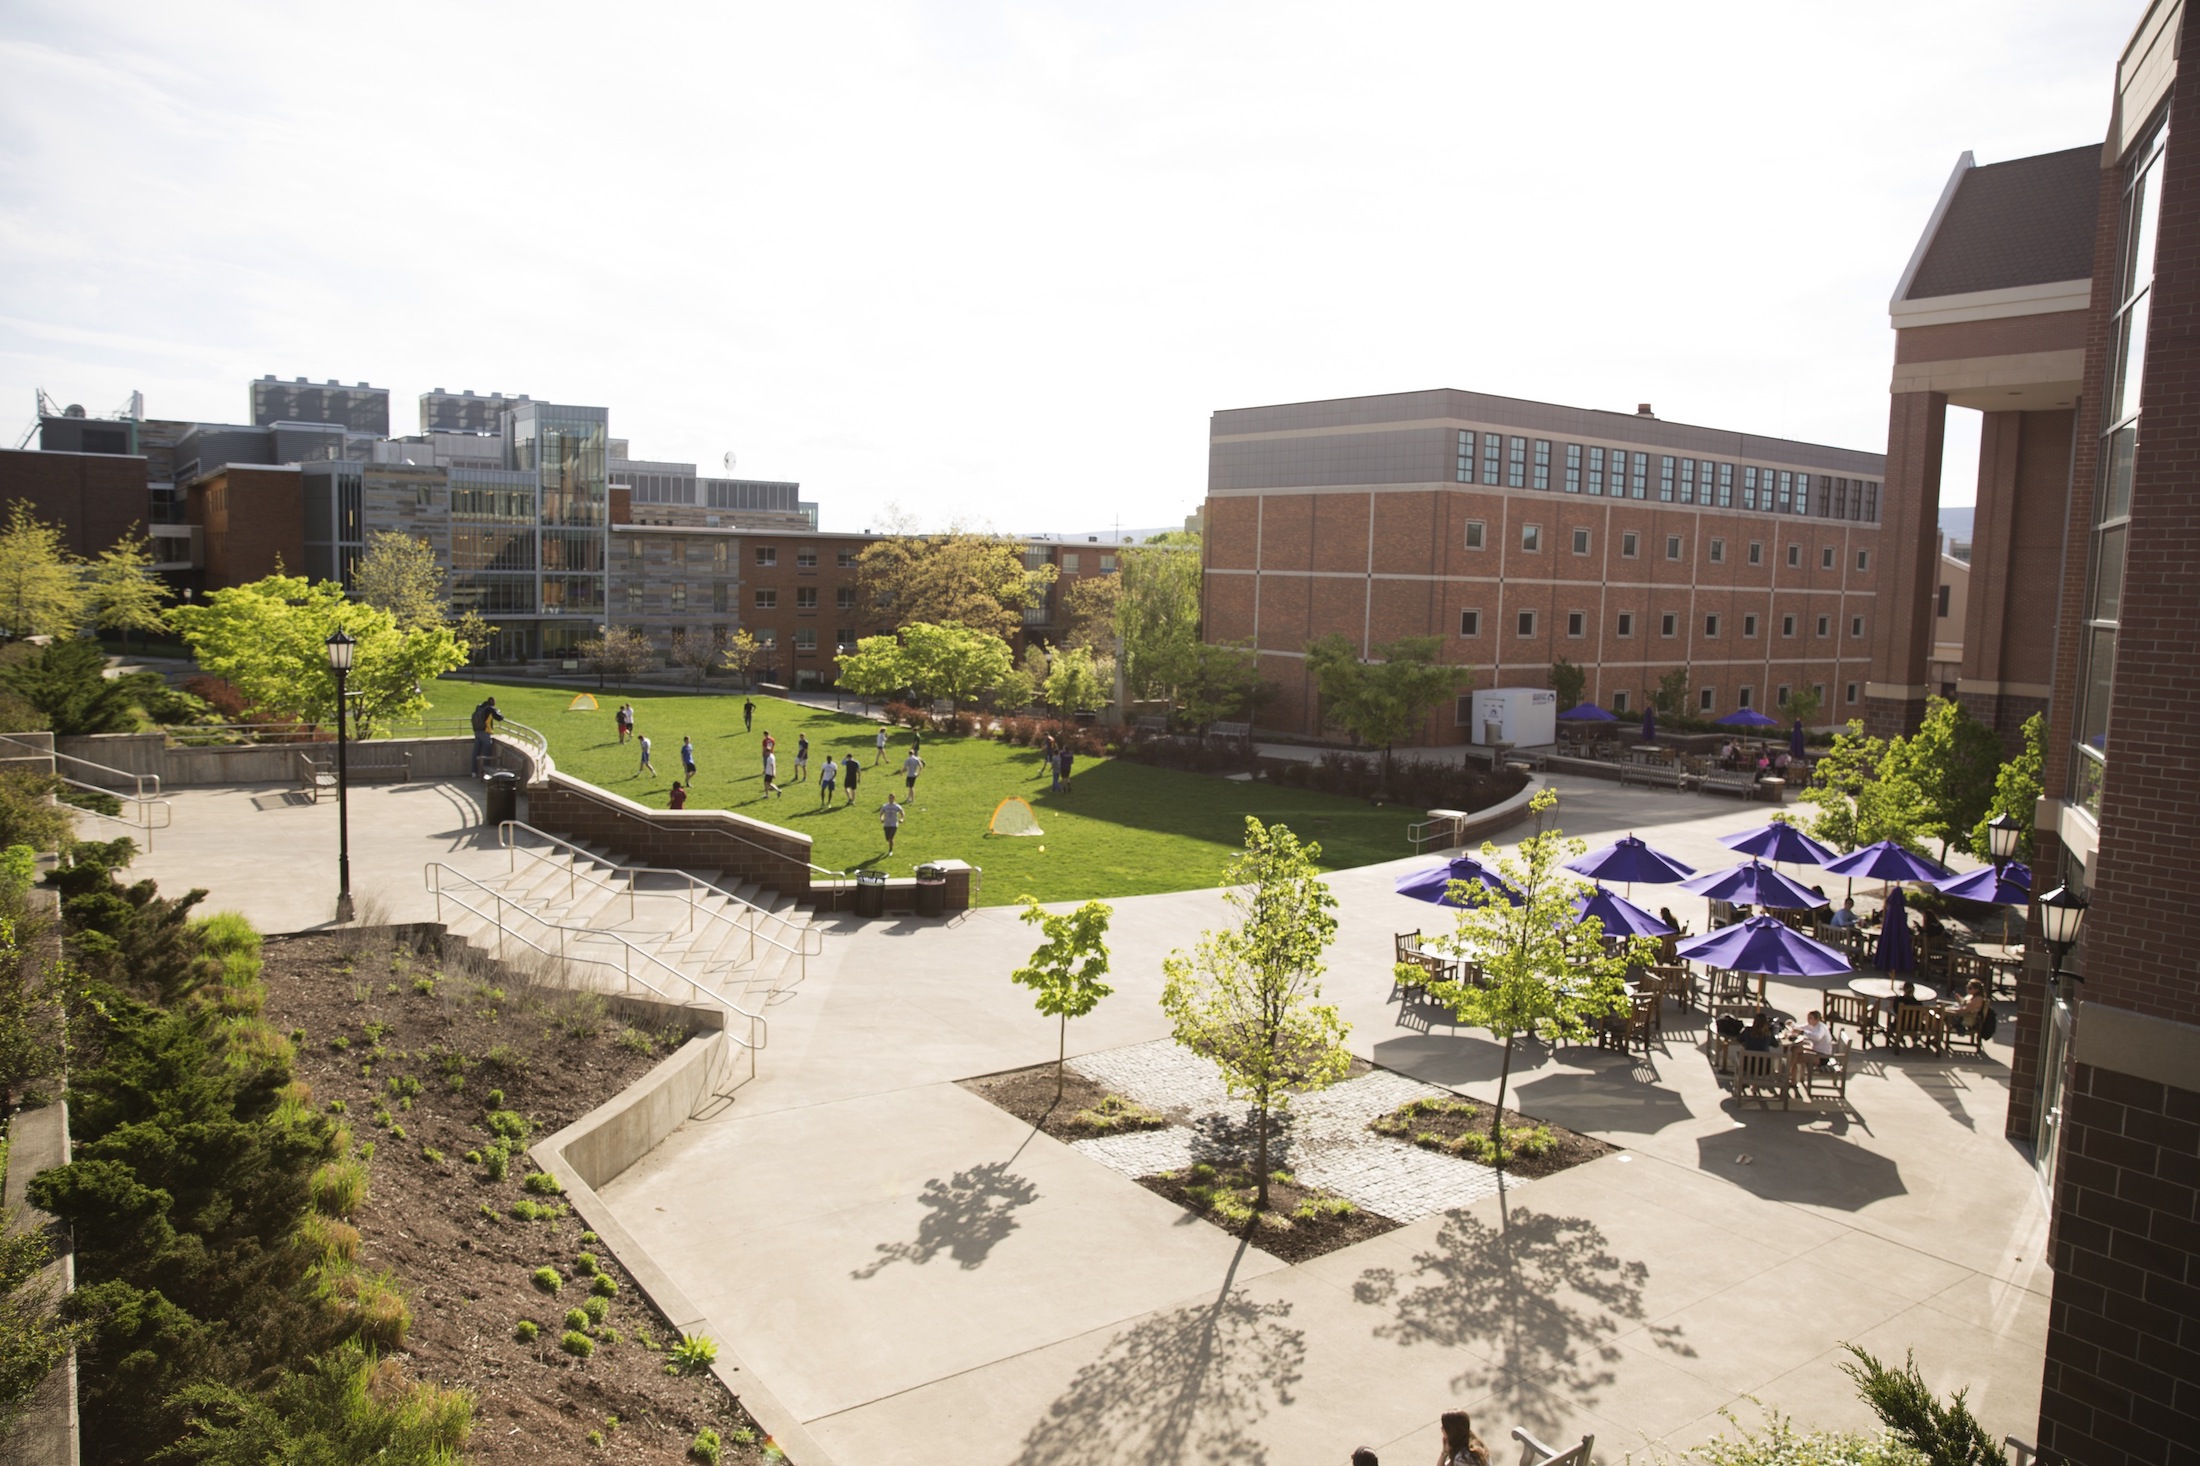 The University of Scranton Open House events are planned for Sunday, Oct. 23, and Sunday, Nov. 6. Registration and campus tours begin at 9 a.m.